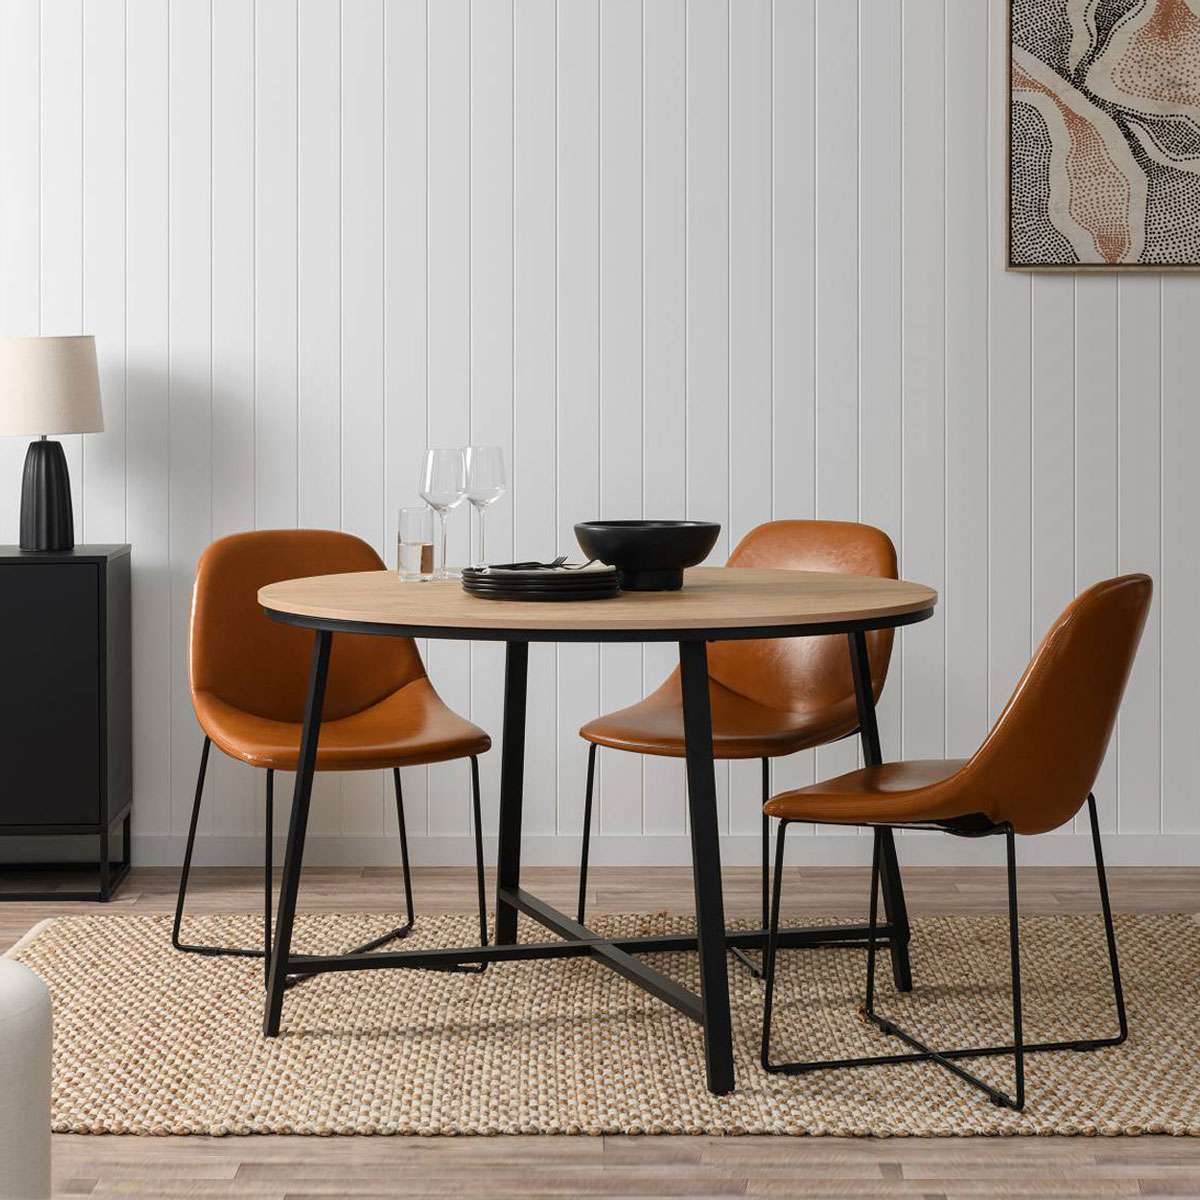 Reese 4 Seater Dining Table - Black